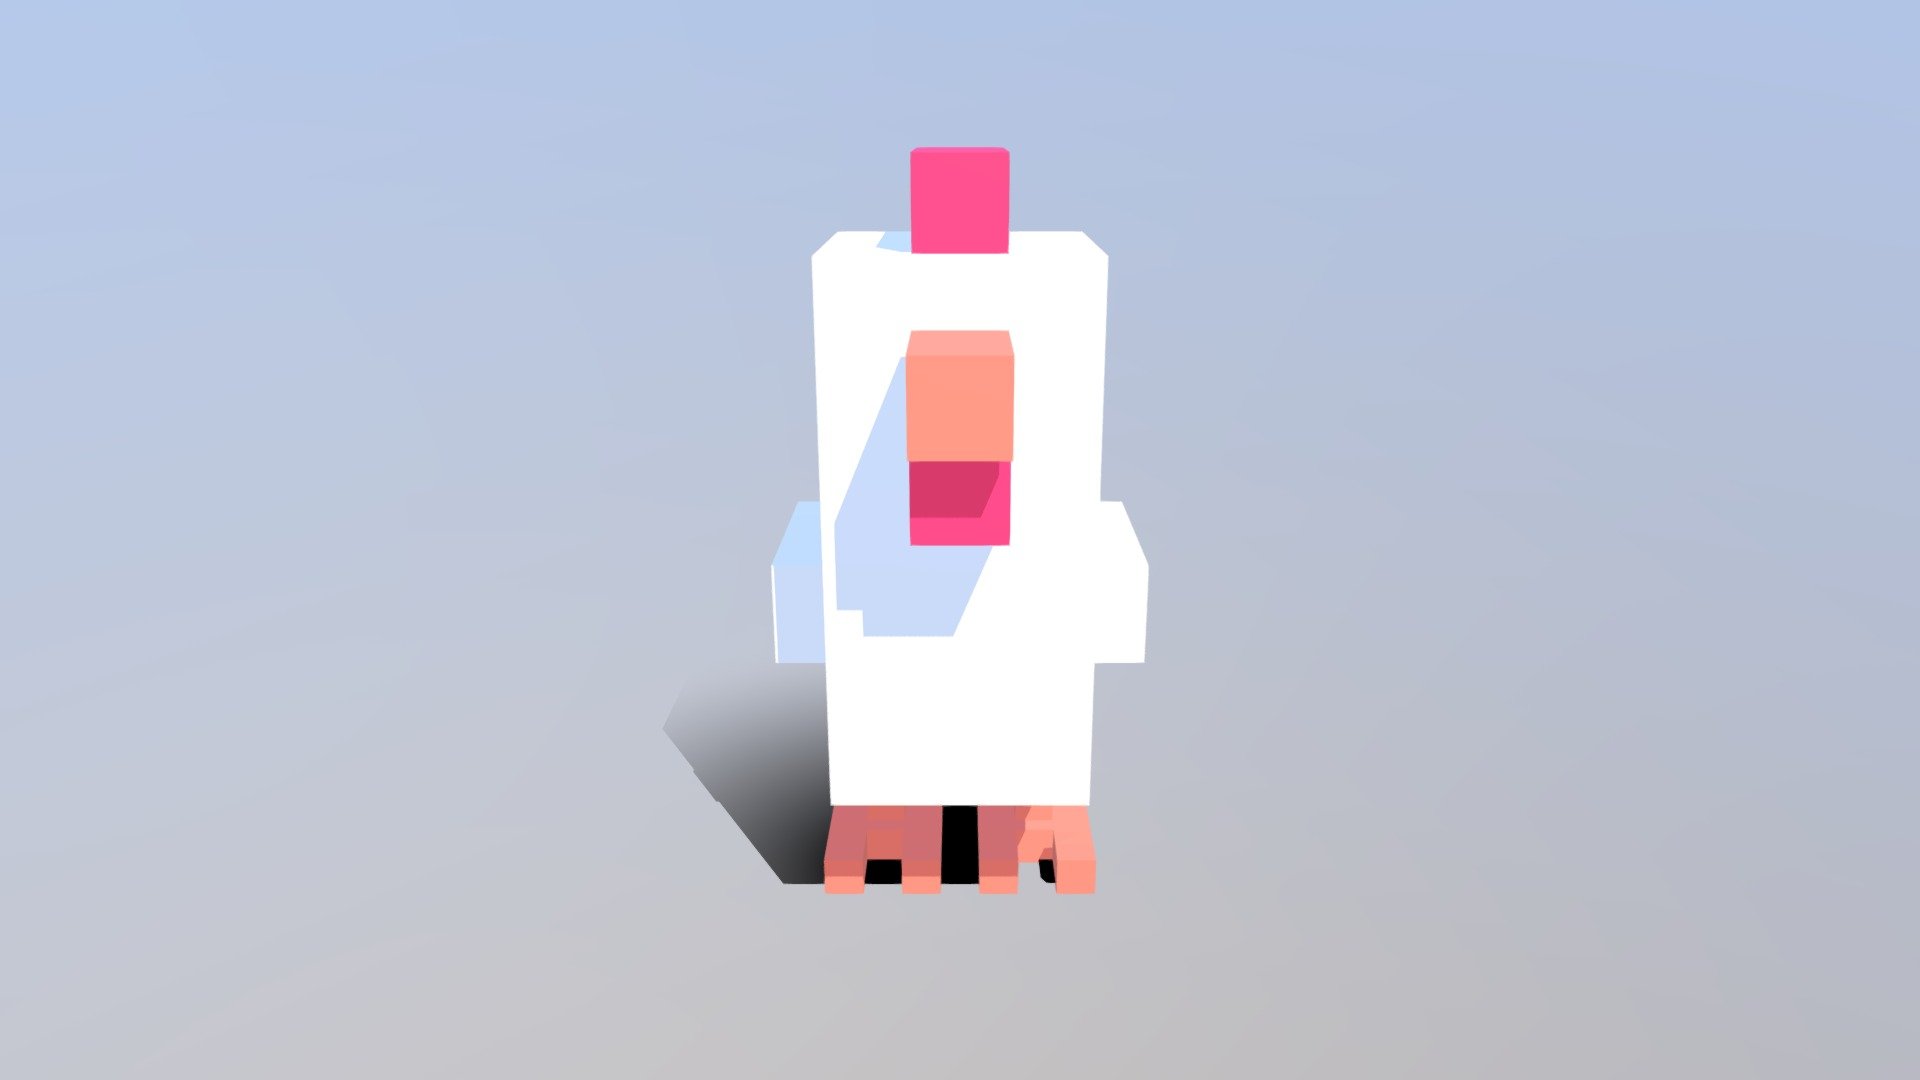 Chicken Royale - Discover Crossy Road Real 3D Version 